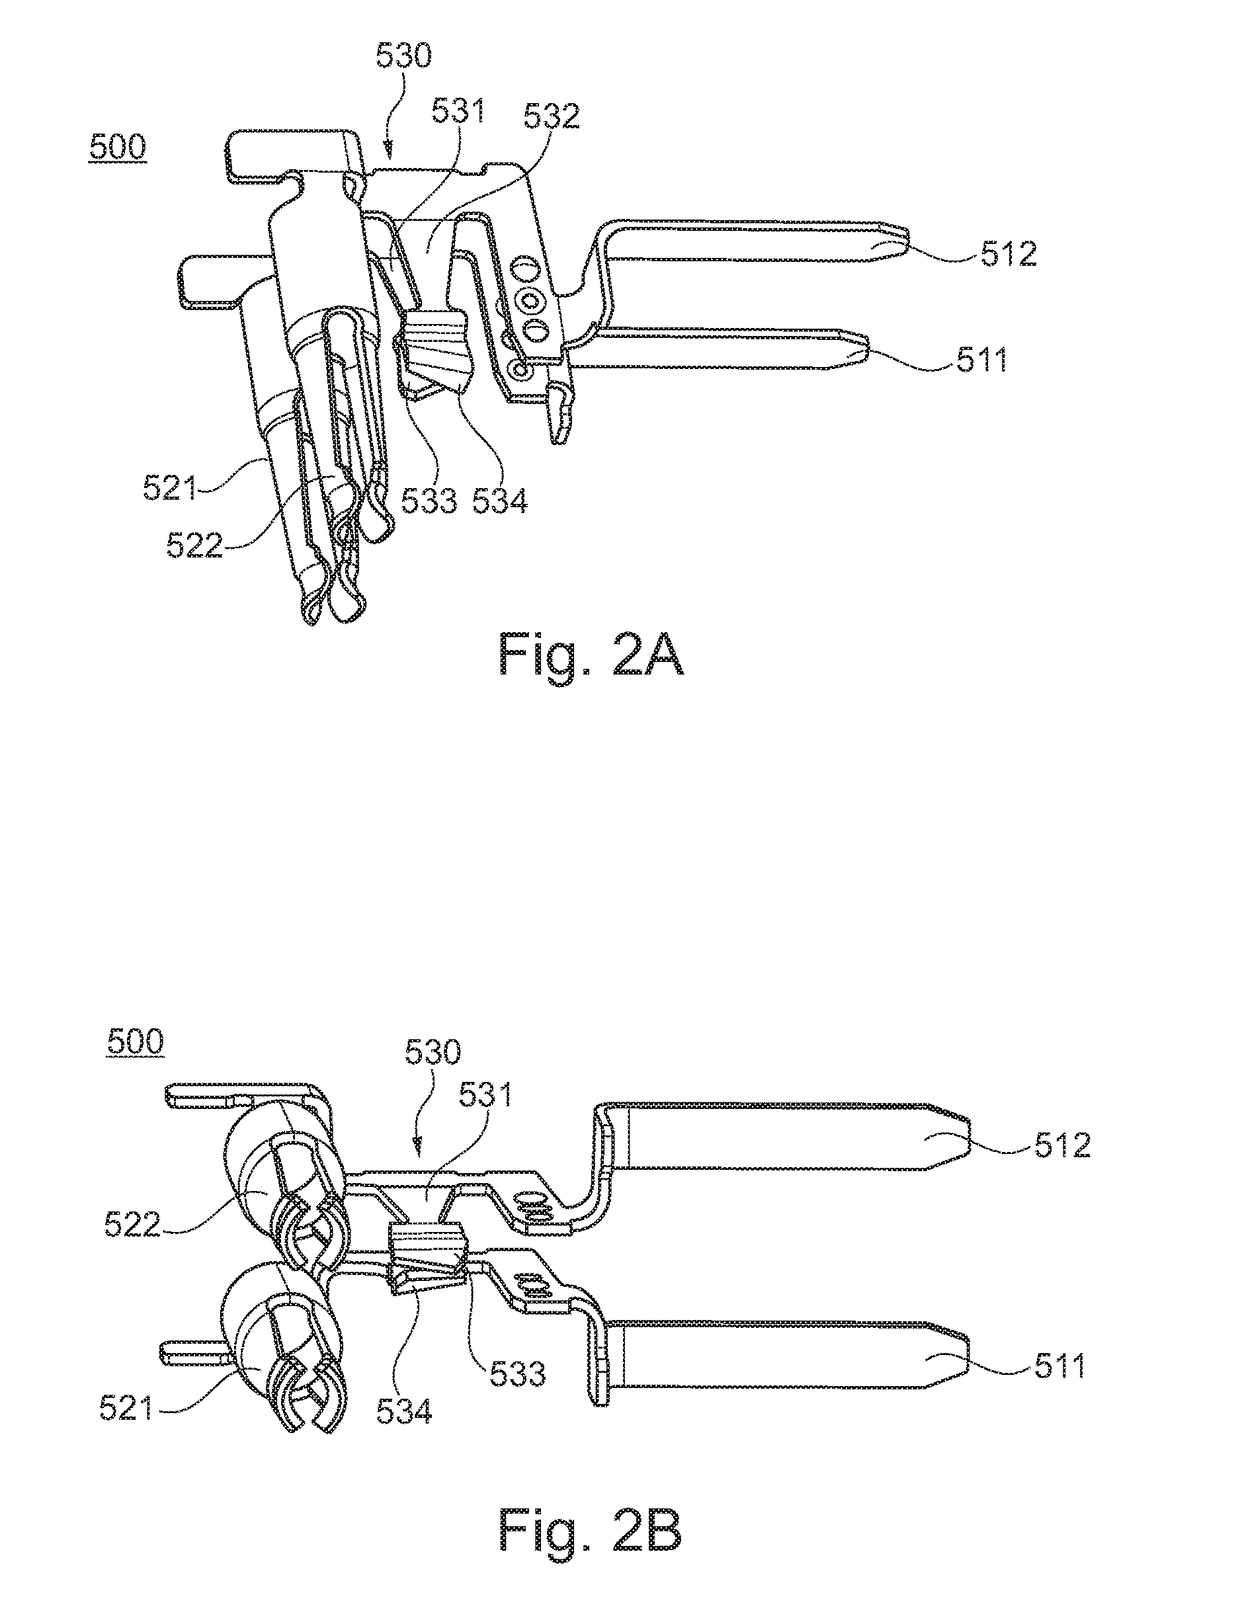 Electrical plug connector for a safety restraint system